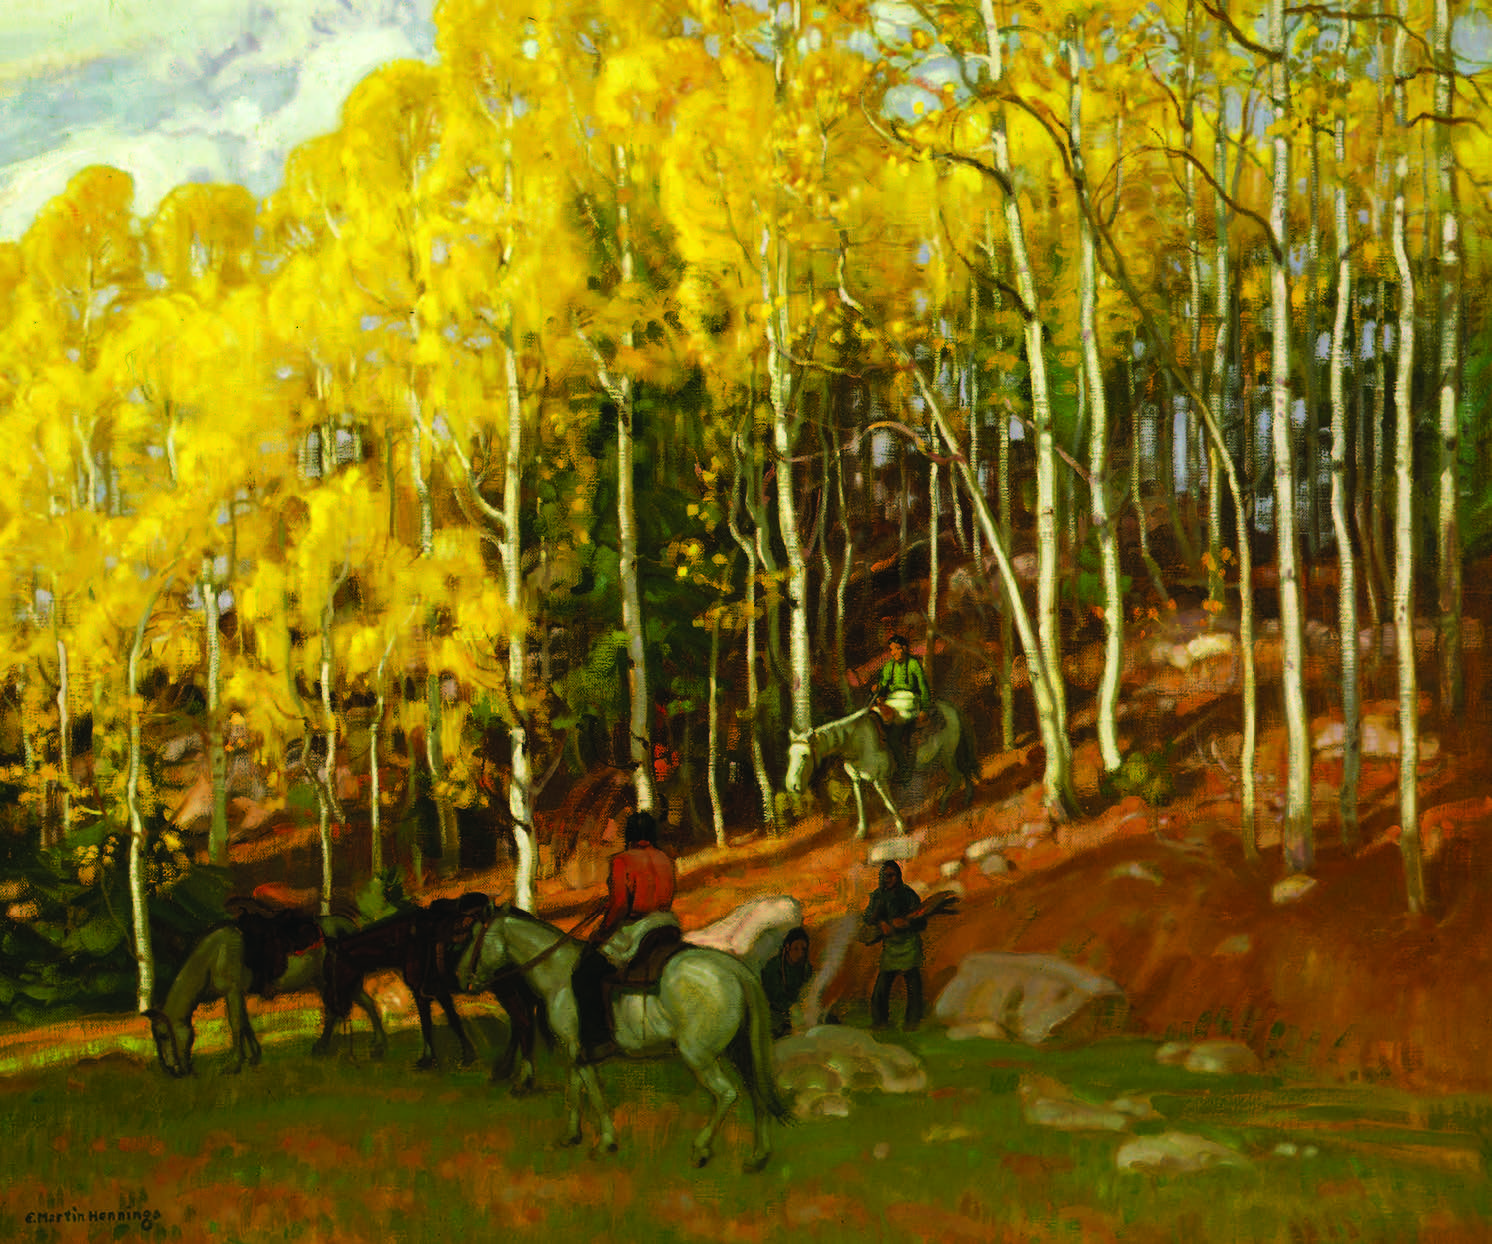 E. Martin Hennings, The Rendezvous, n.d. Oil on canvas, 25 ¼ × 30 in. Collection of the New Mexico Museum of Art. Museum purchase with funds from the Museum of New Mexico Foundation, 1977 (3805.23P). Photograph by Blair Clark.